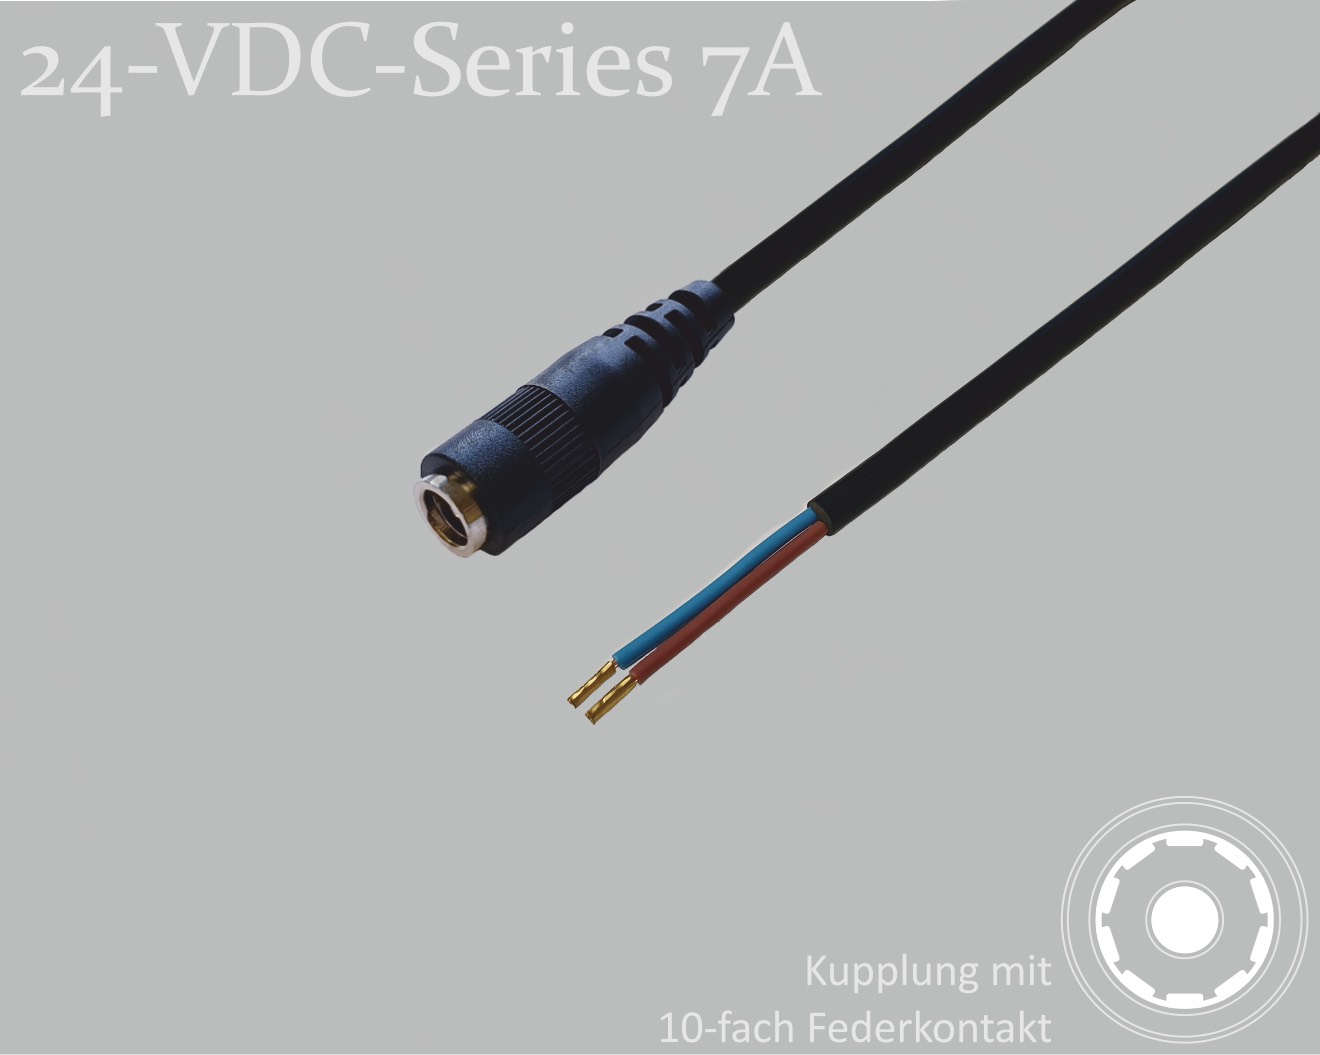 24-VDC-Series 7A, DC connection cable, DC coupling with 10-spring contact 2.5x5.5mm, round cable 2x0.50mm², black, wire end sleeves, 1.5m